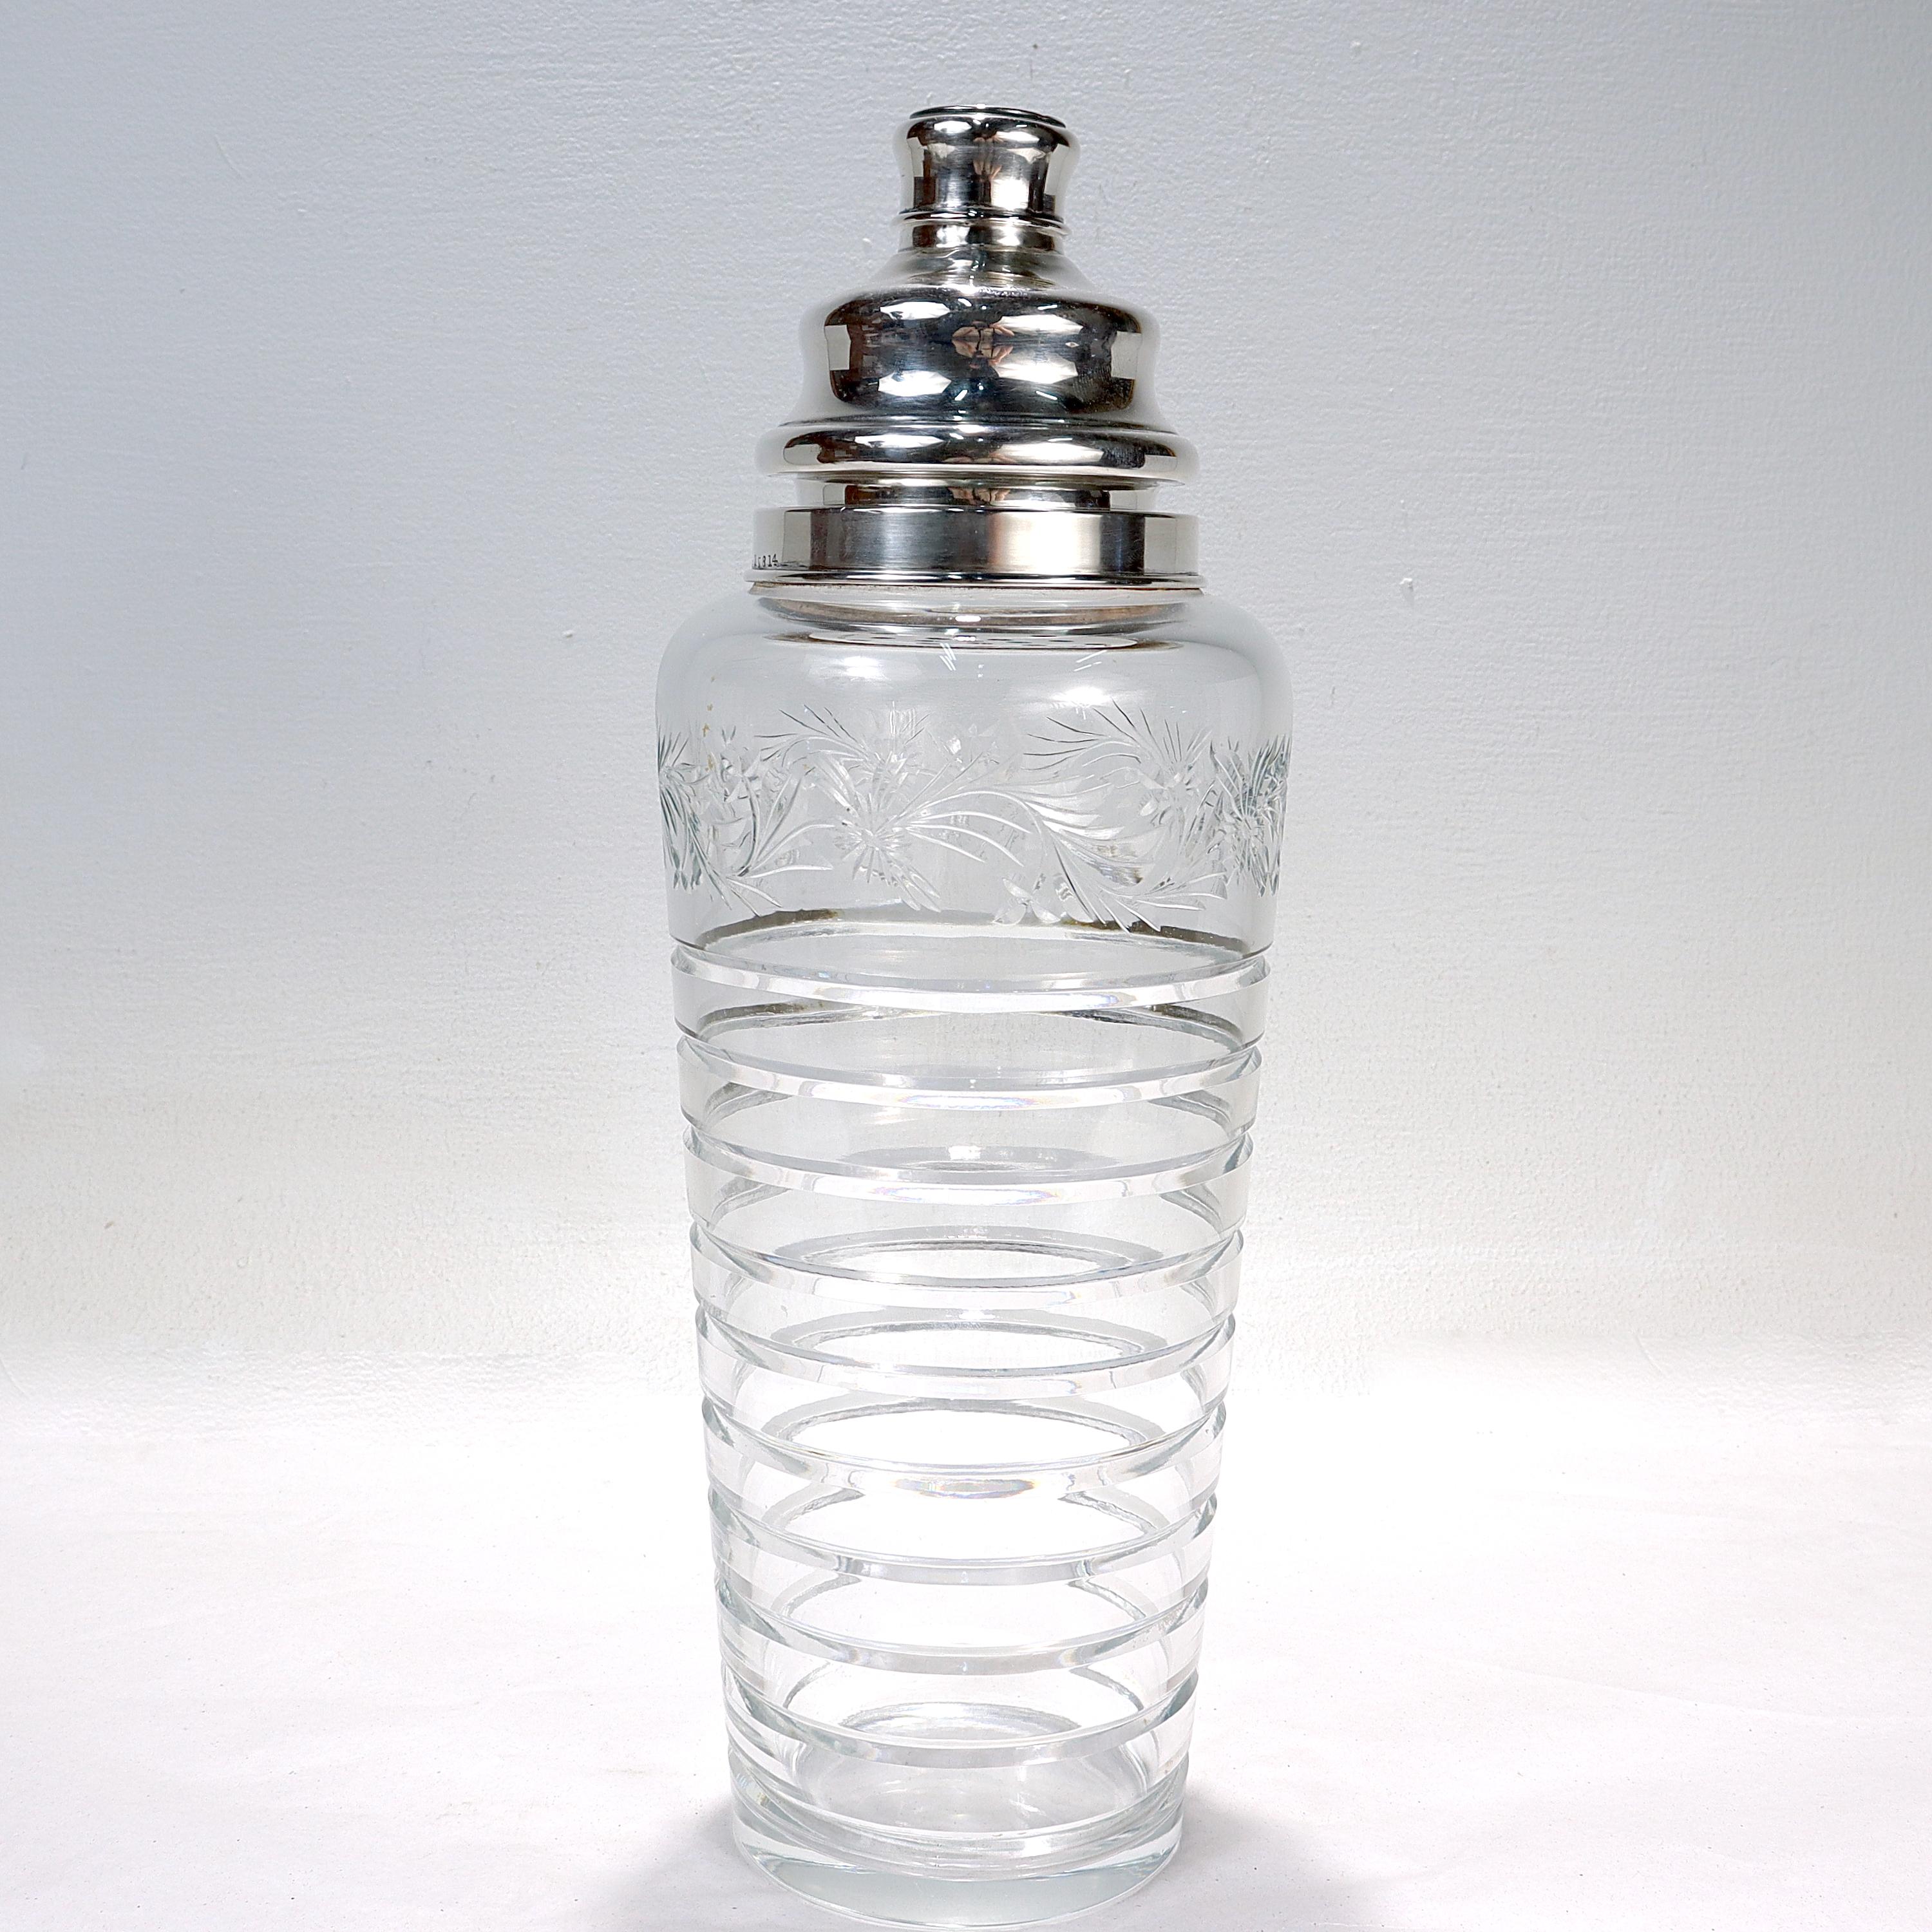 A fine Art Deco glass & silver cocktail shaker.

By Hawkes. 

With a sterling silver lid & rim, cut glass floral decoration and a grooved, ribbed pattern around the body.

Simply a great large-sized cocktail shaker from Hawkes! 

Date:
20th